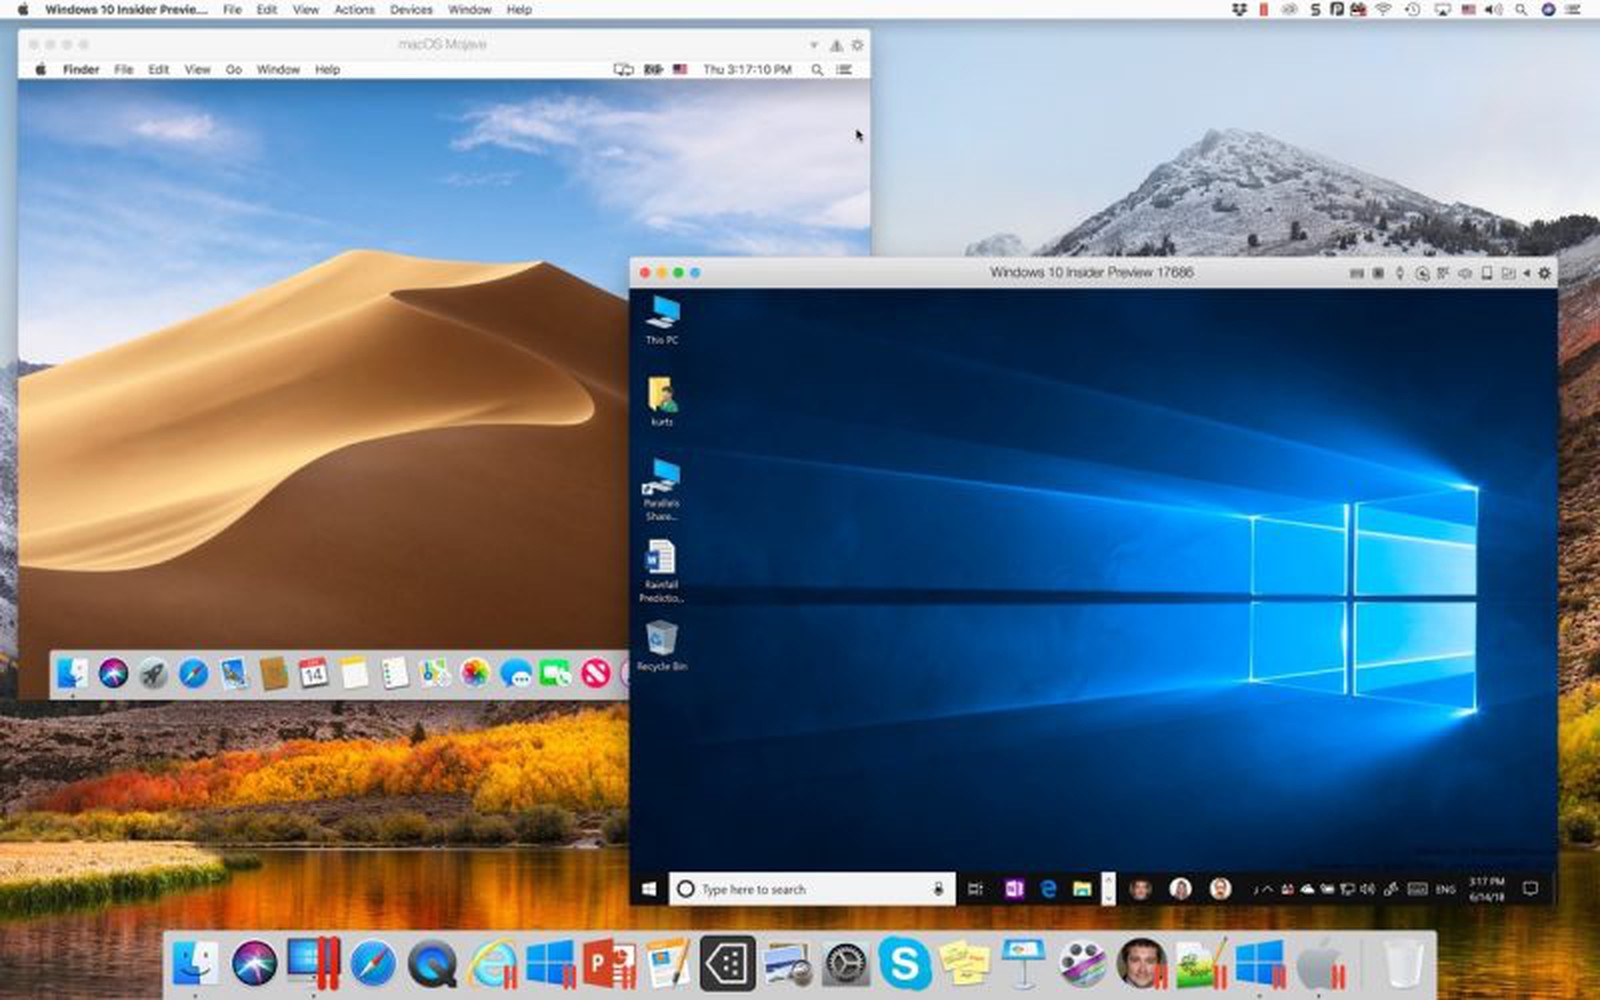 parallels for mac m1